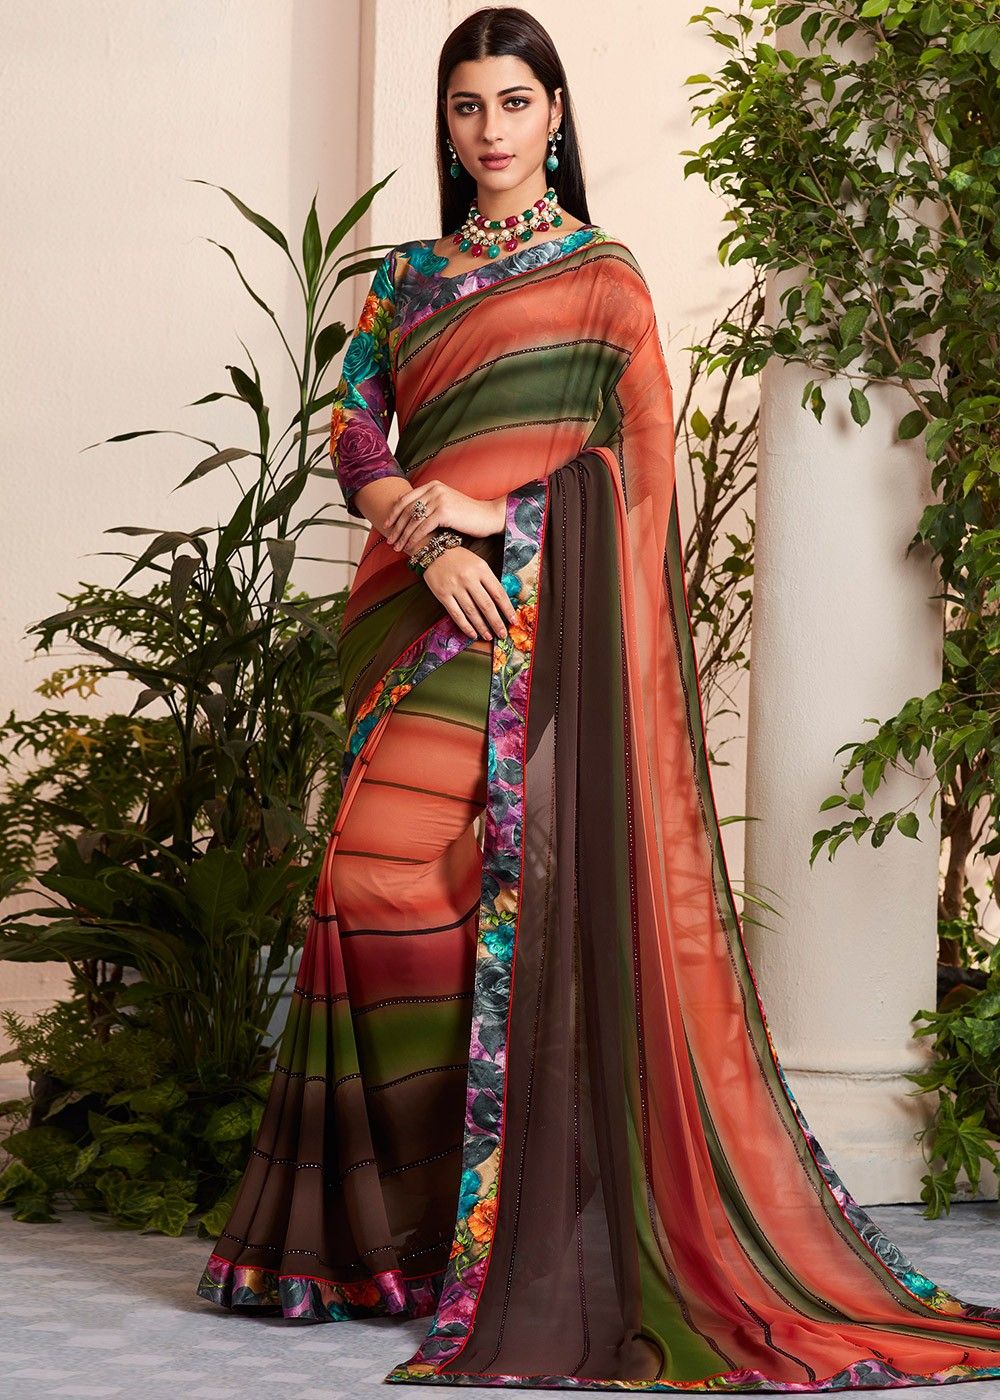 Update more than 86 multicolor blouse with saree super hot